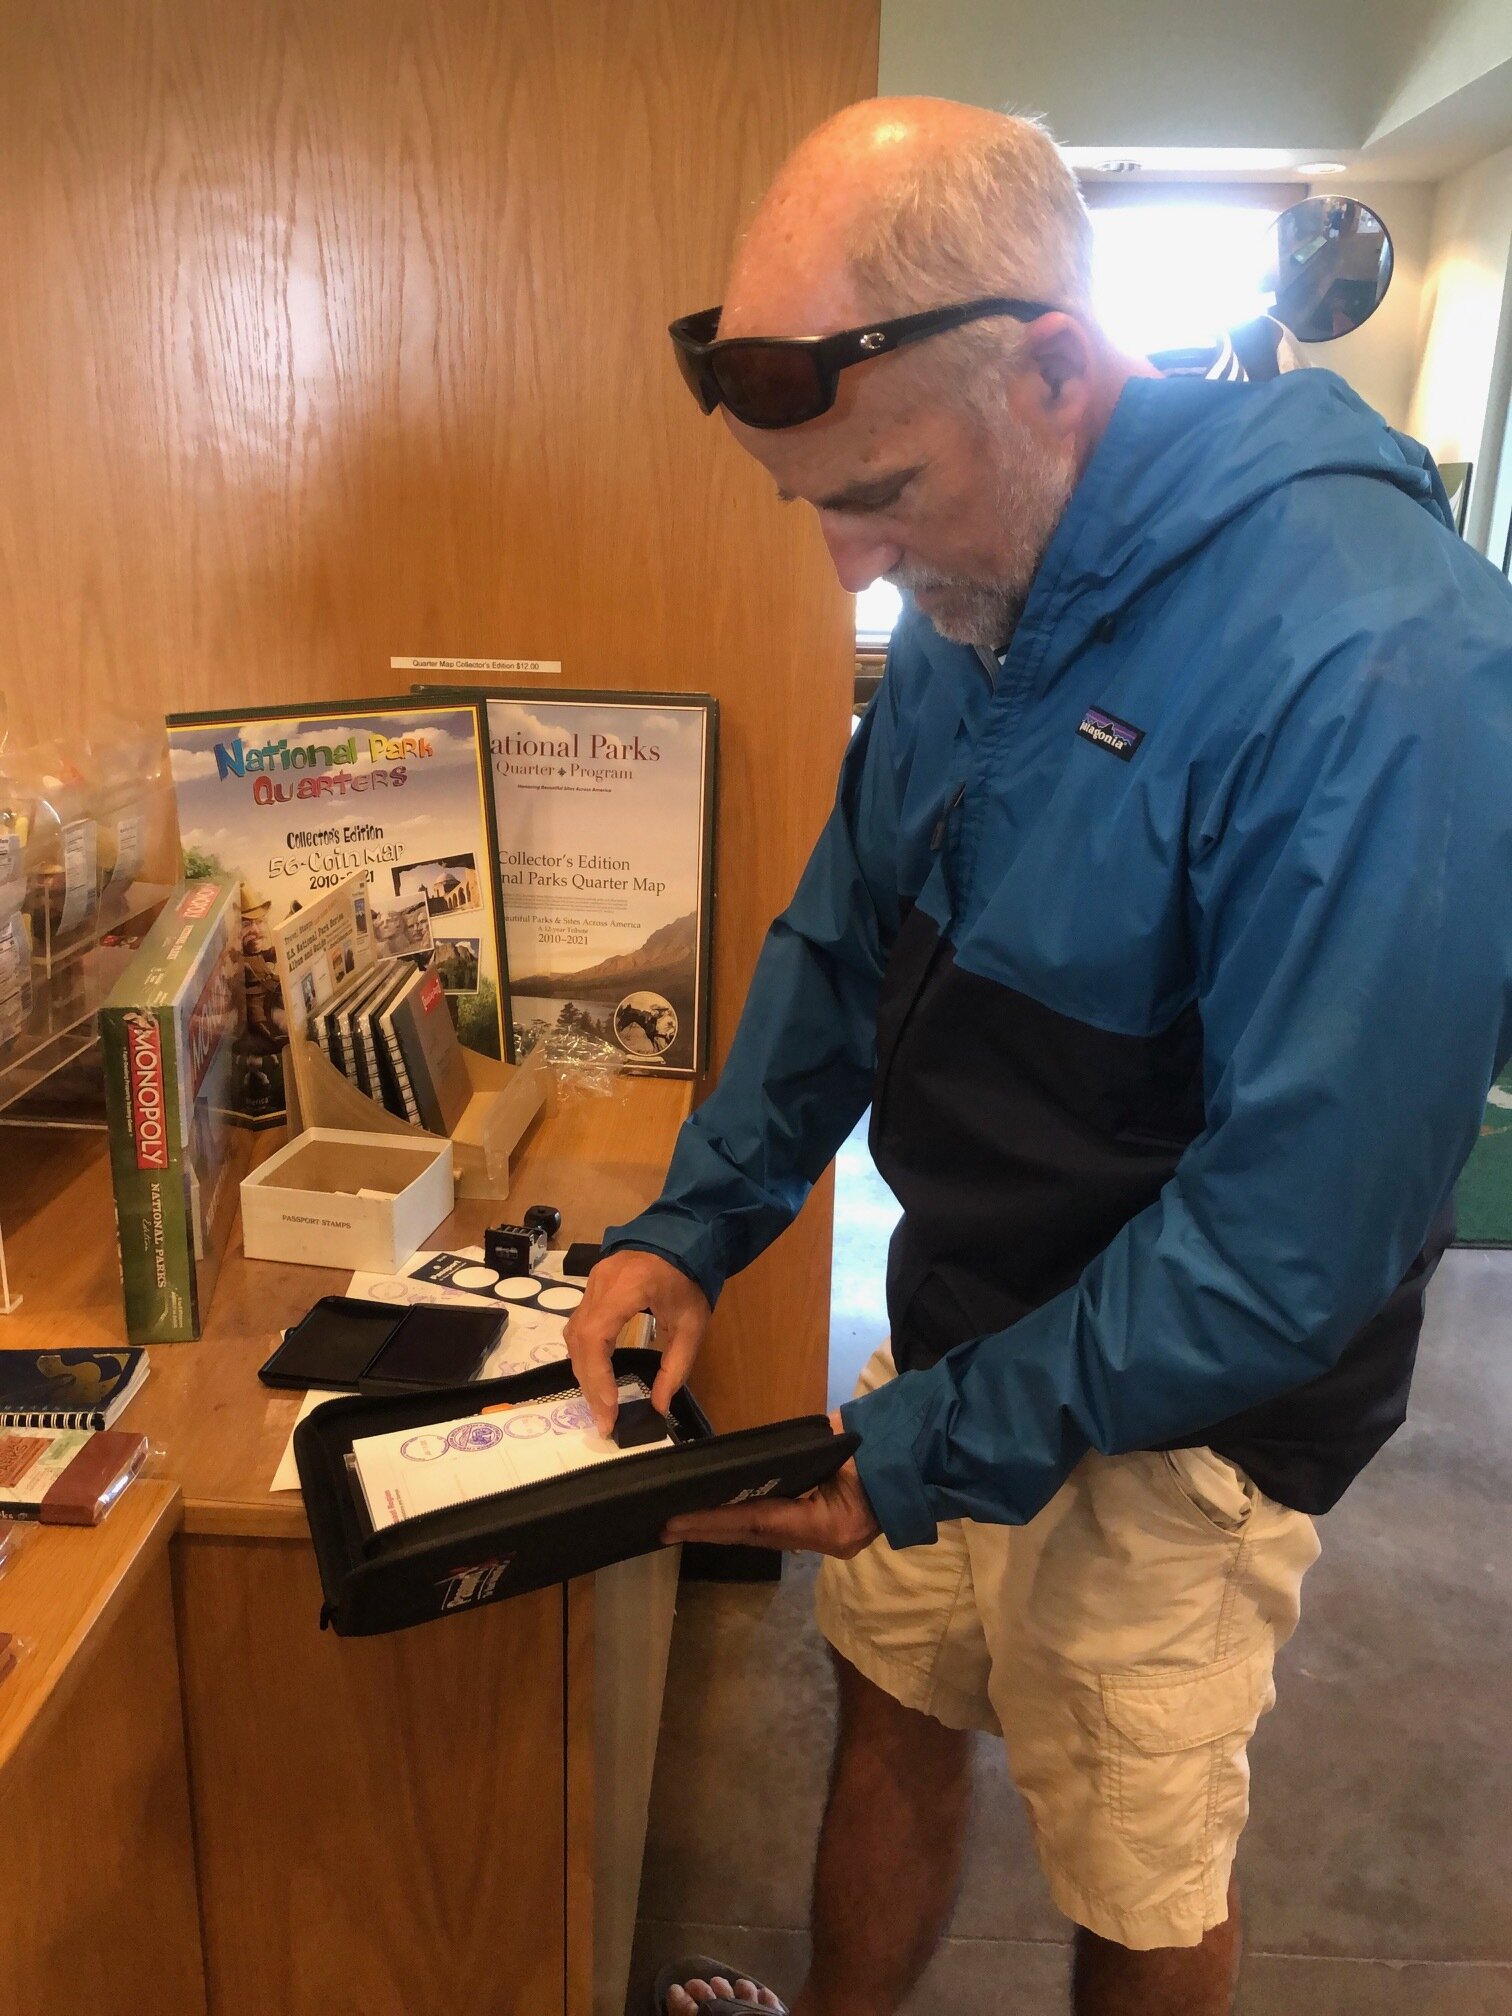  Craig stamping our National Parks Passport book at Big Cypress National Preserve in Ochopee, Florida. Here we saw a large alligator swimming down the river as the park ranger spoke. Our National Parks book was a gift from our dear friends and neighb